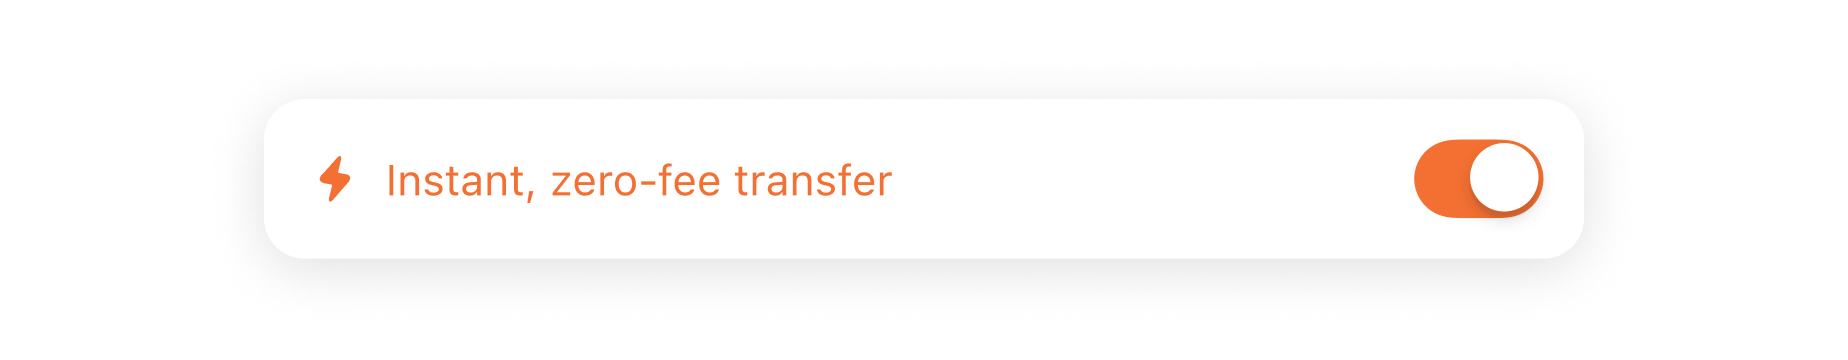 Off-chain, P2P transactions